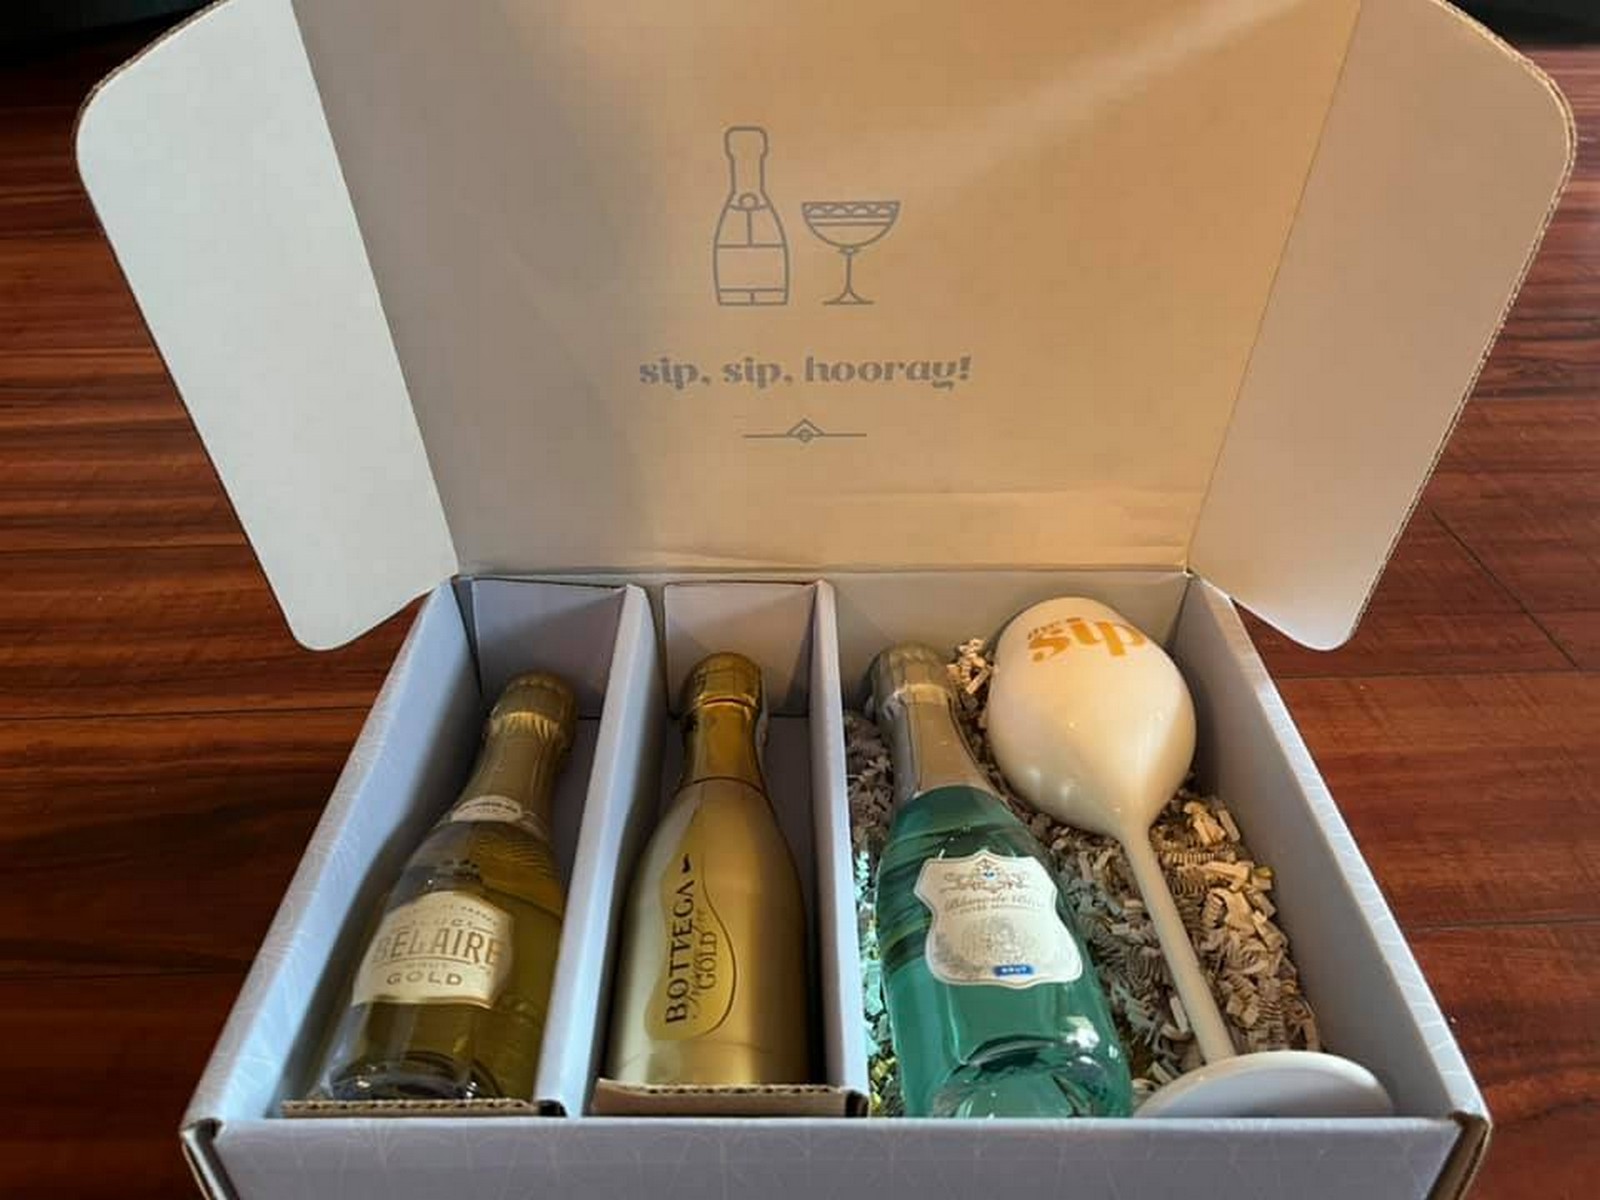 Chase Sapphire Reserve Champagne Gift